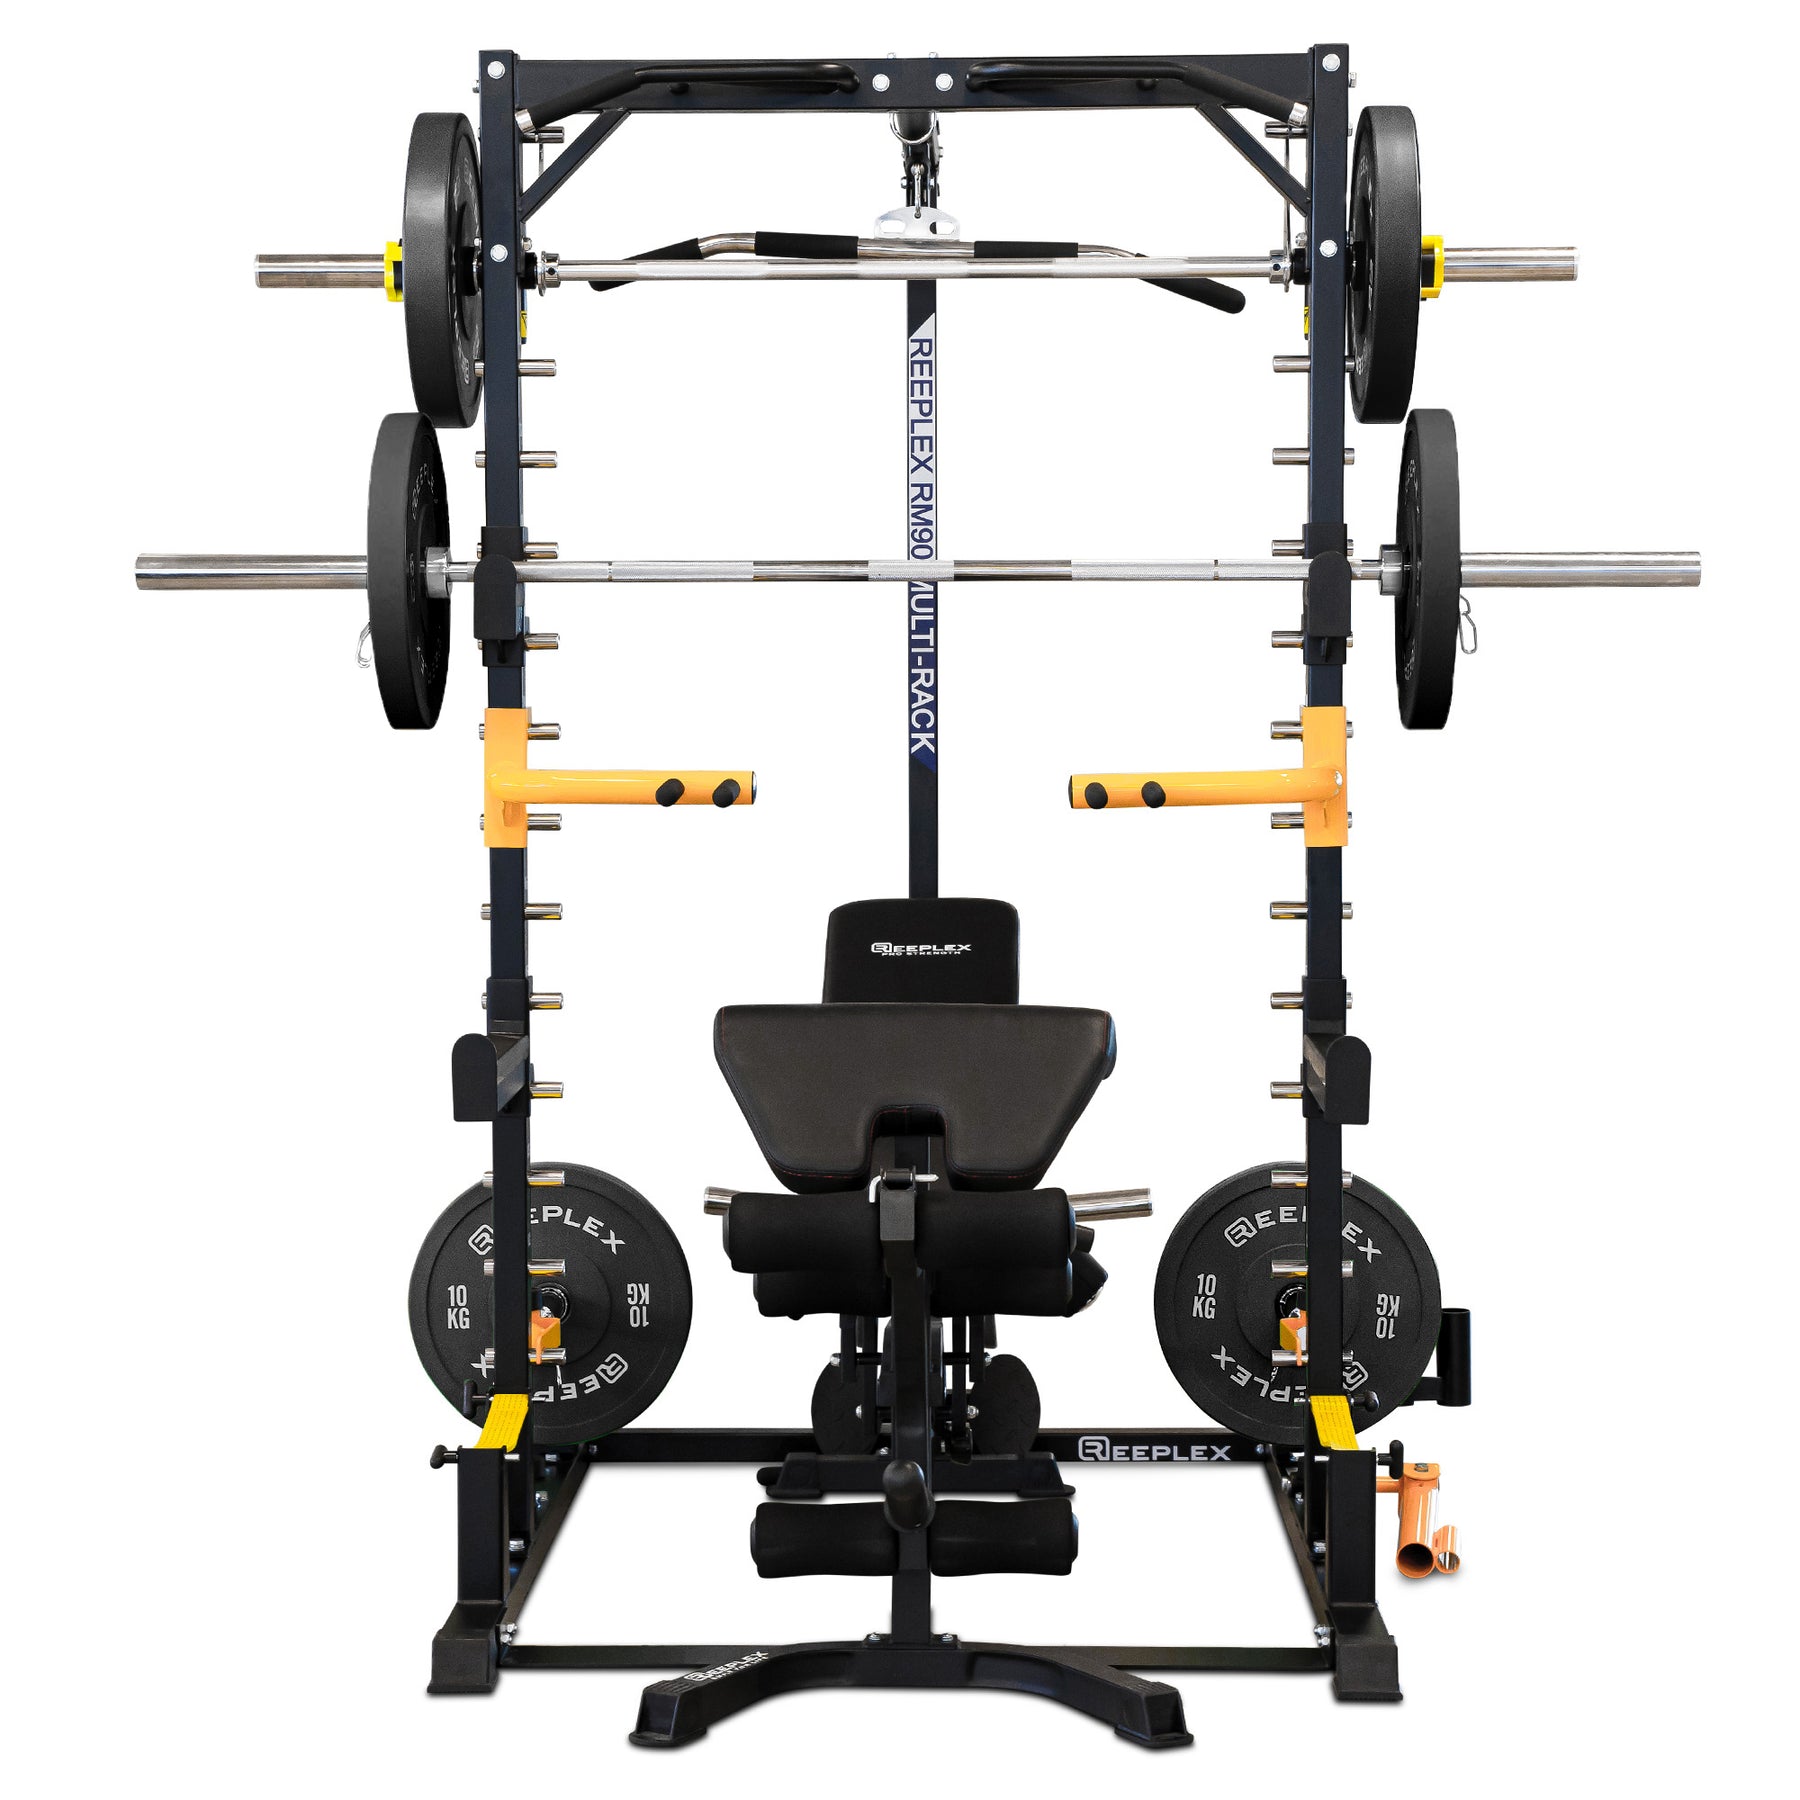 Reeplex RM90 Squat Rack with Smith Machine and Lat Pulldown + Adjustable Bench + 100kg Black Bumper Weight Set